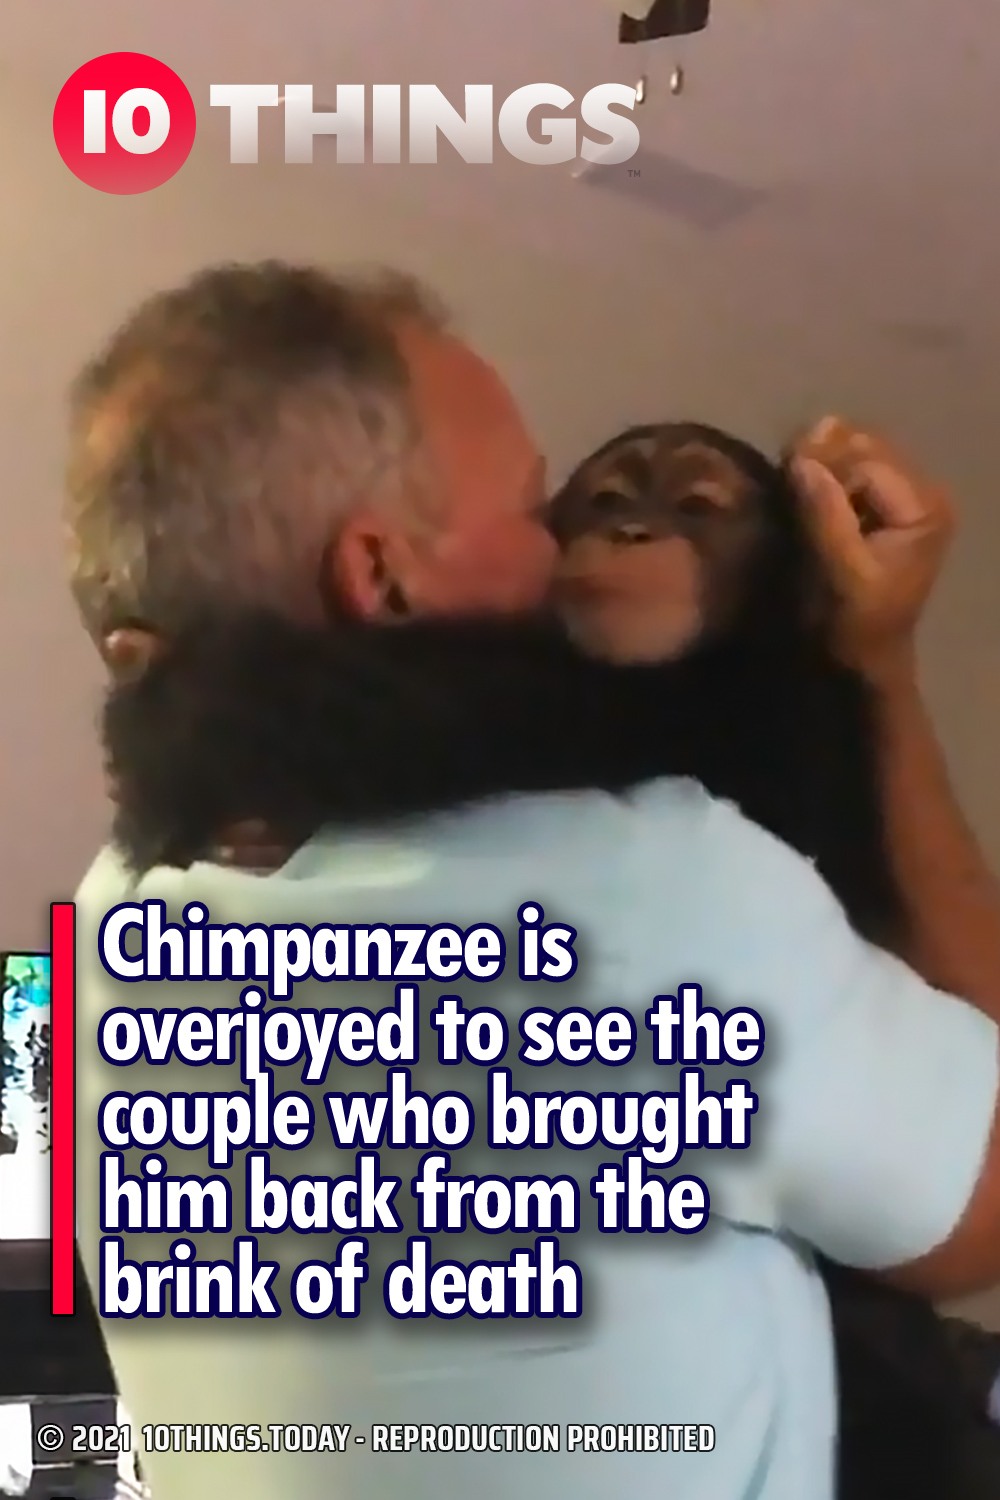 Chimpanzee is overjoyed to see the couple who brought him back from the brink of death